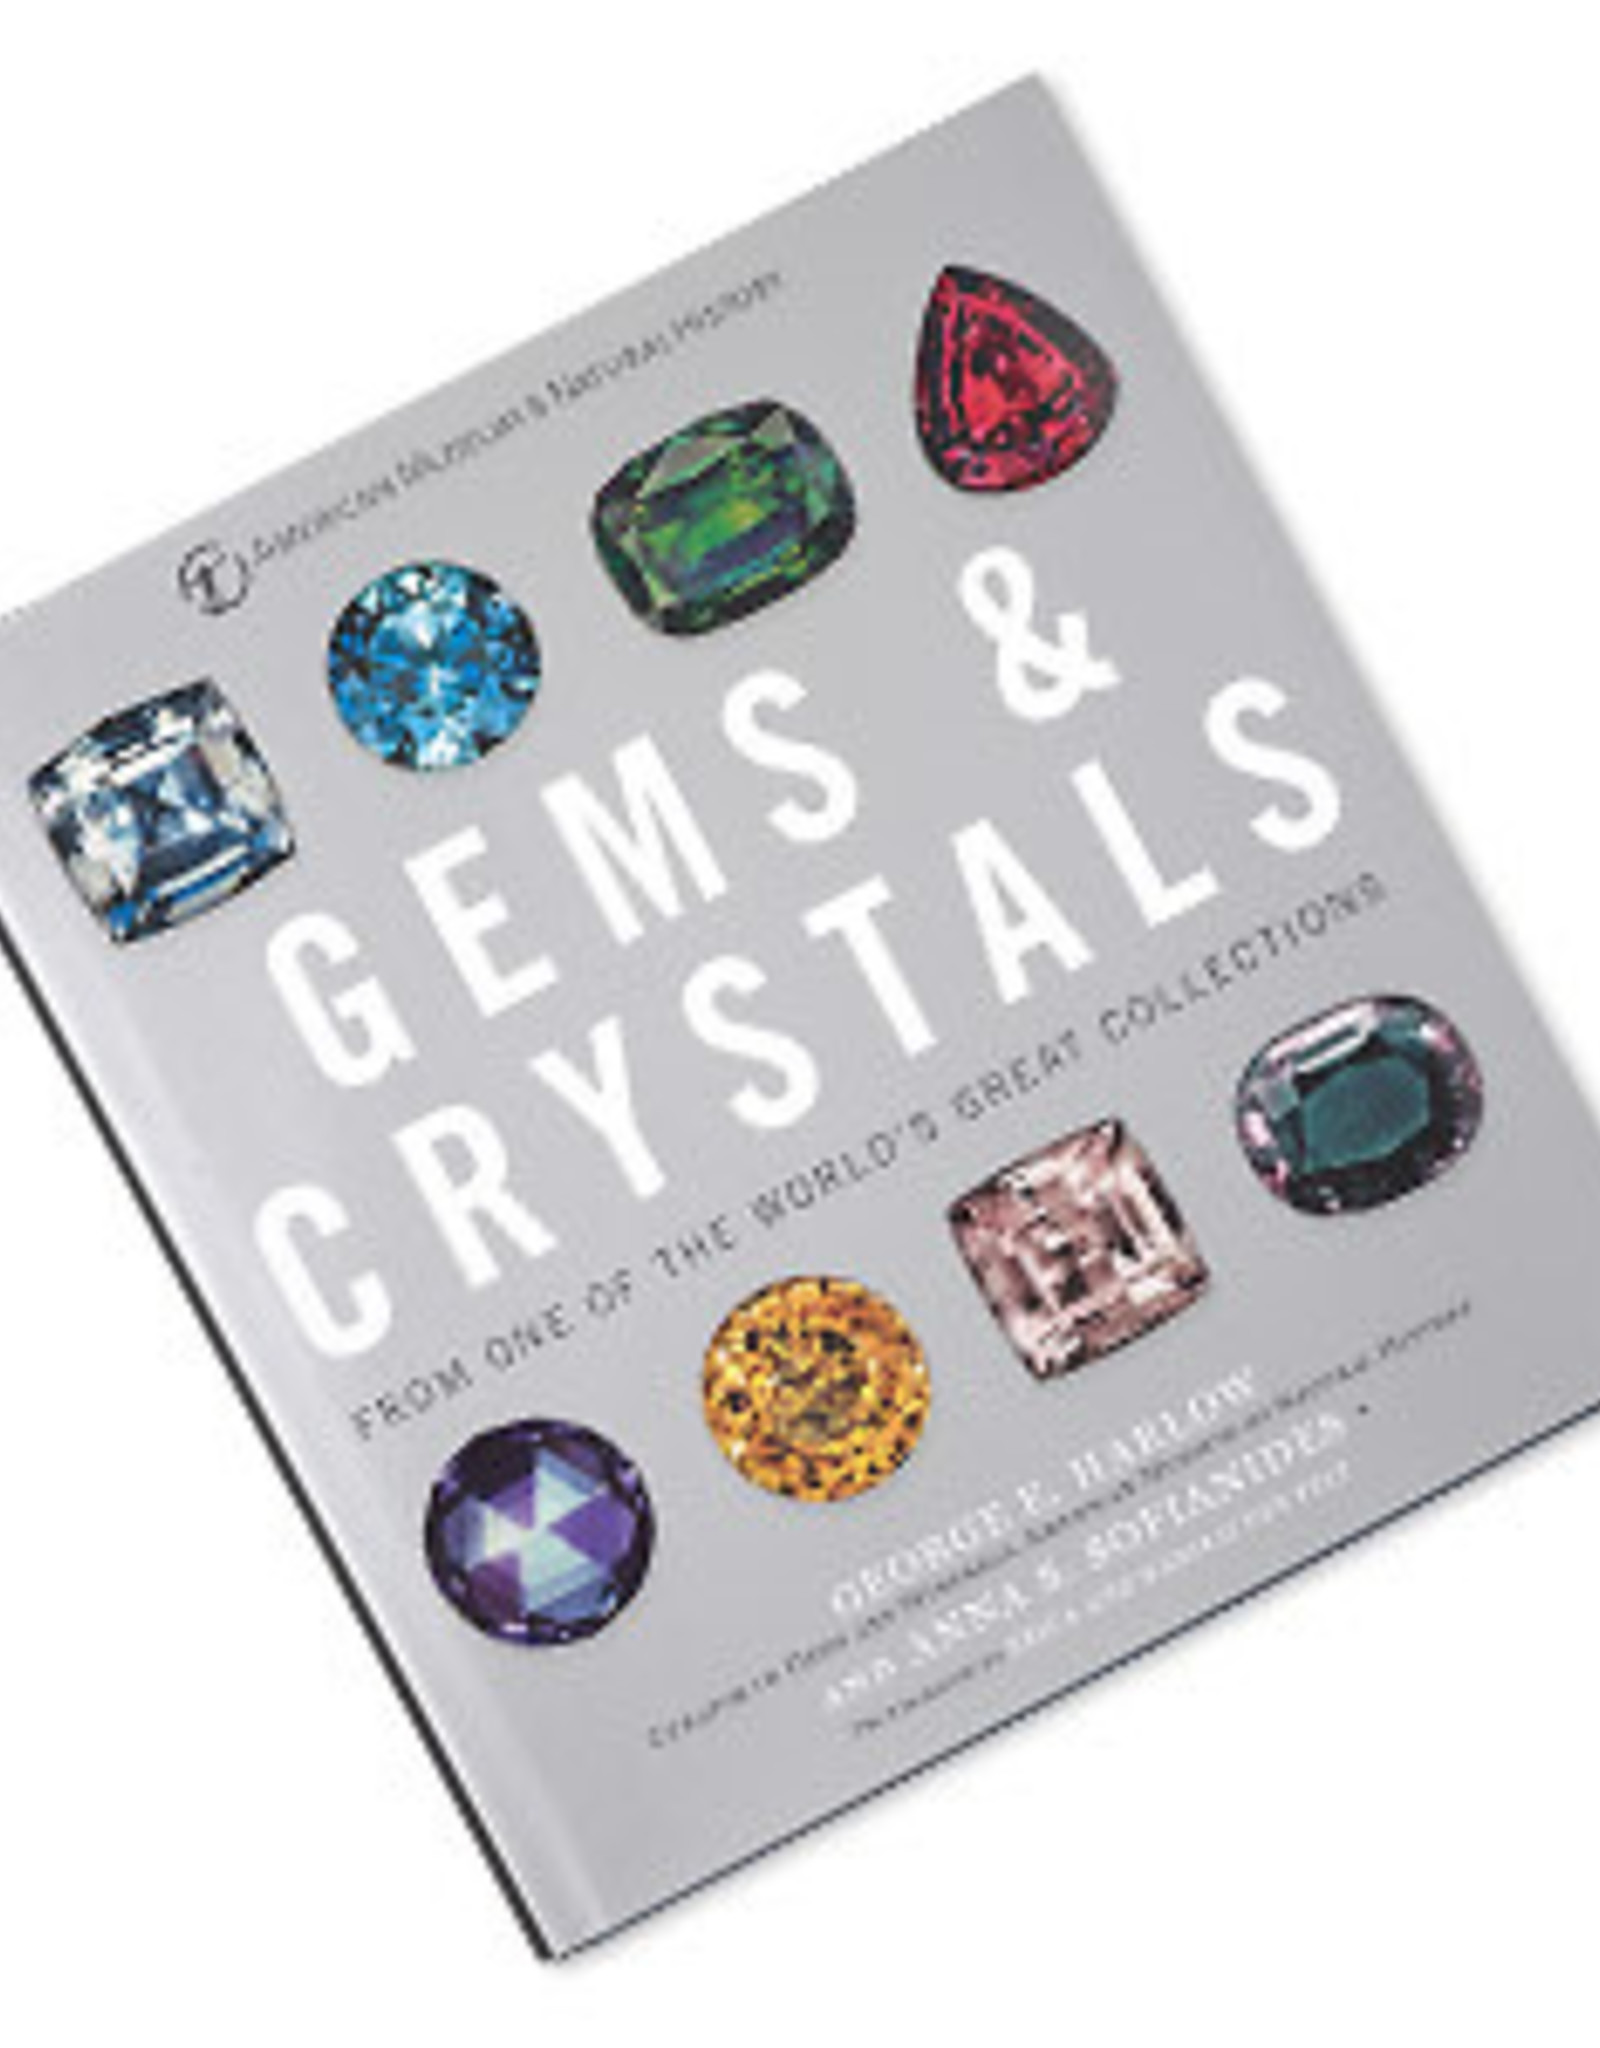 George E. Harlow Gems & Crystals by George E. Harlow & Anna S. Sofianides